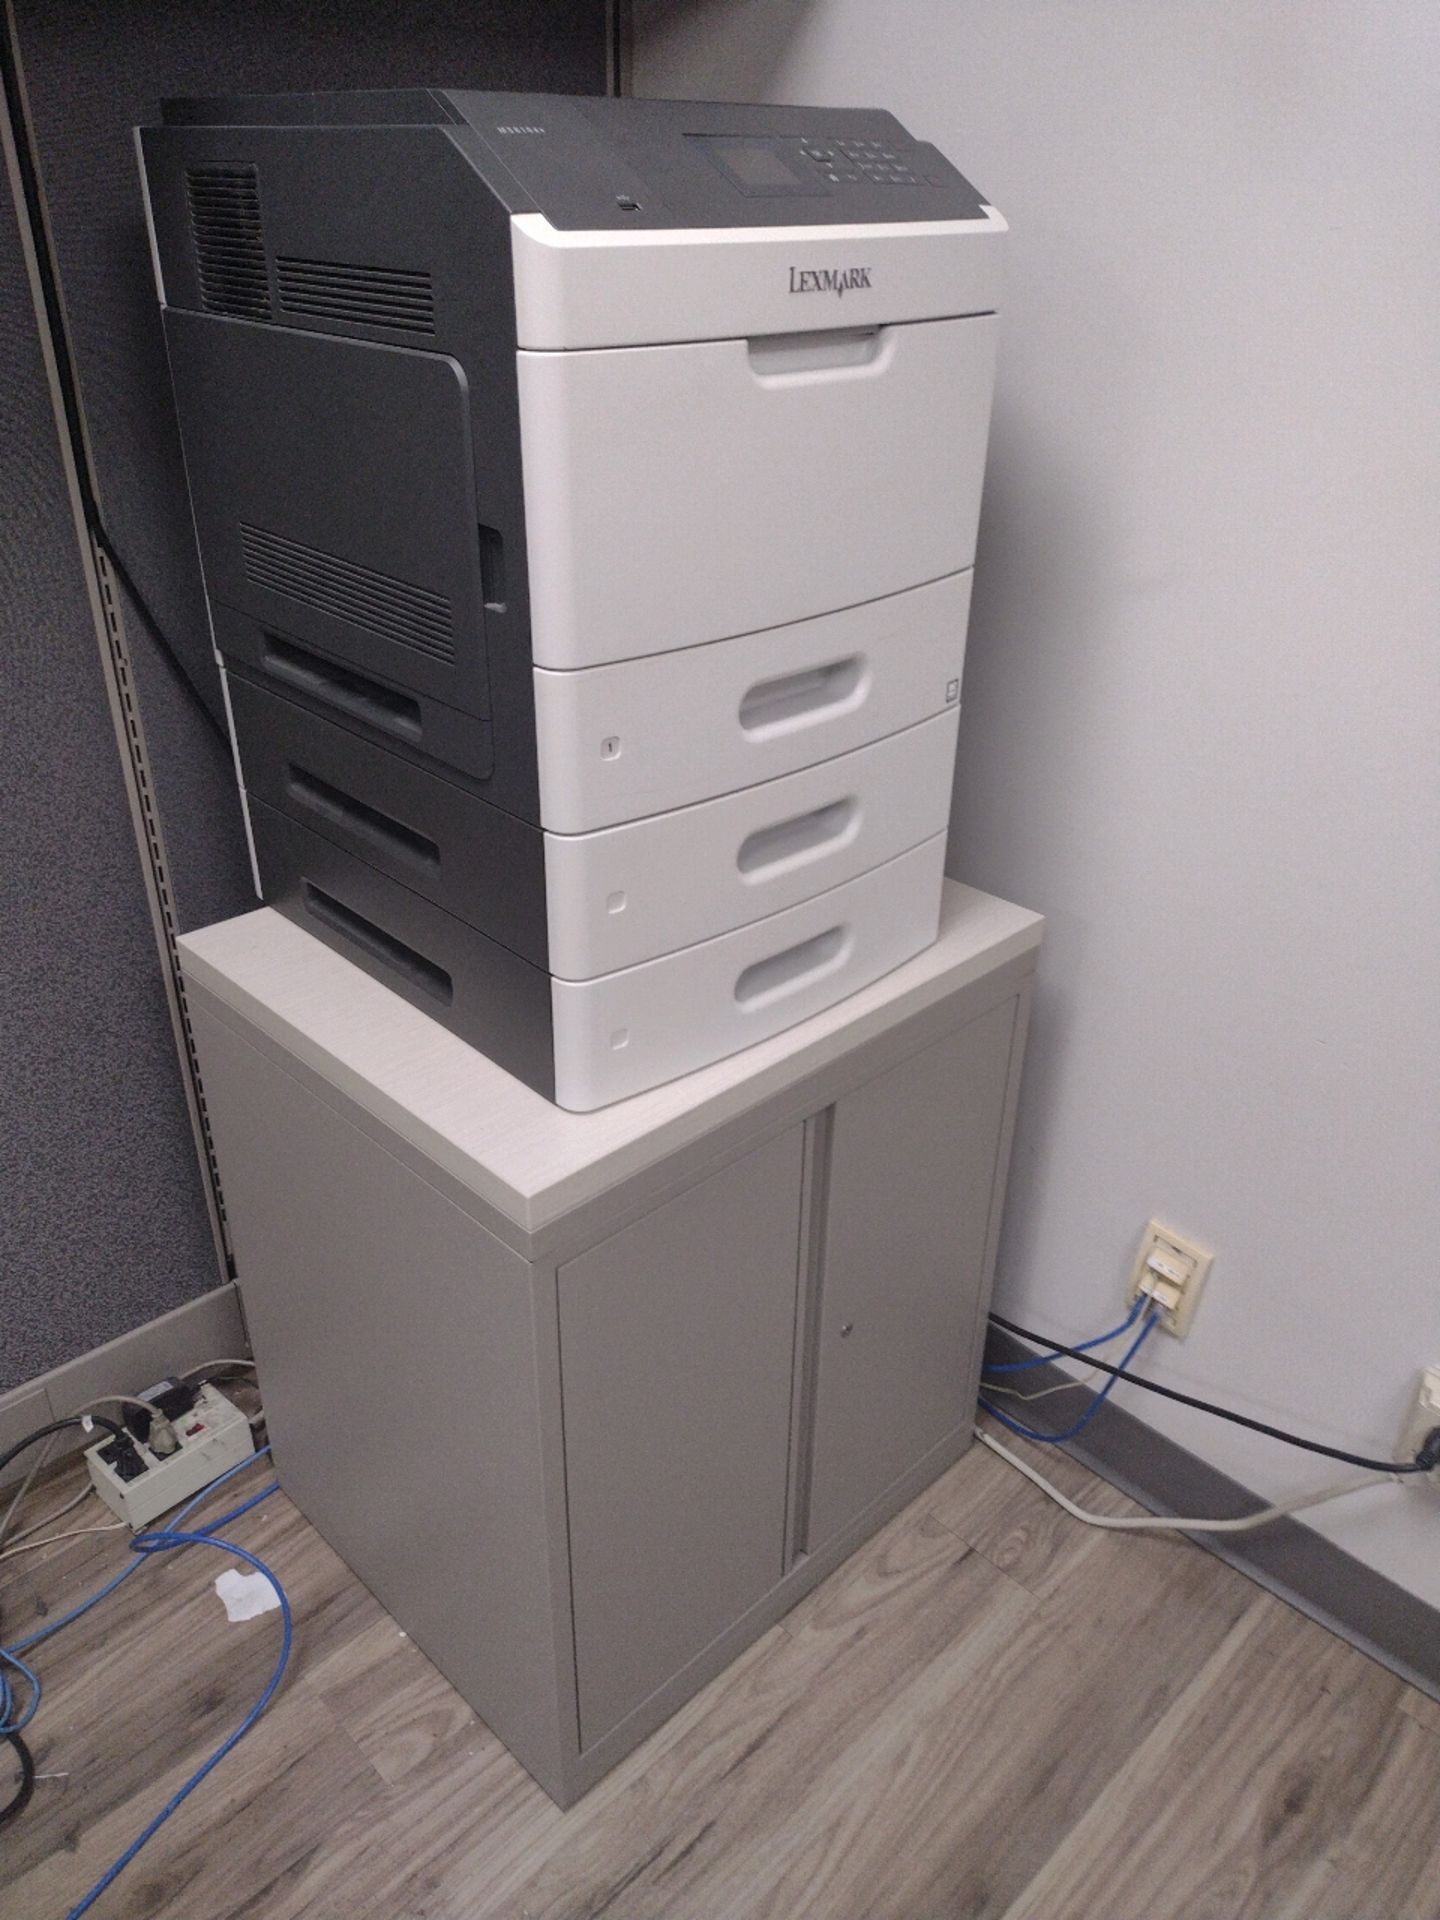 OFFICE SUITE INCLUDE: 6 WORKSTATION CUBICLE, LEXMARK PRINTER, HP PRINTER, 3- CANON DR-C130 - Image 10 of 12